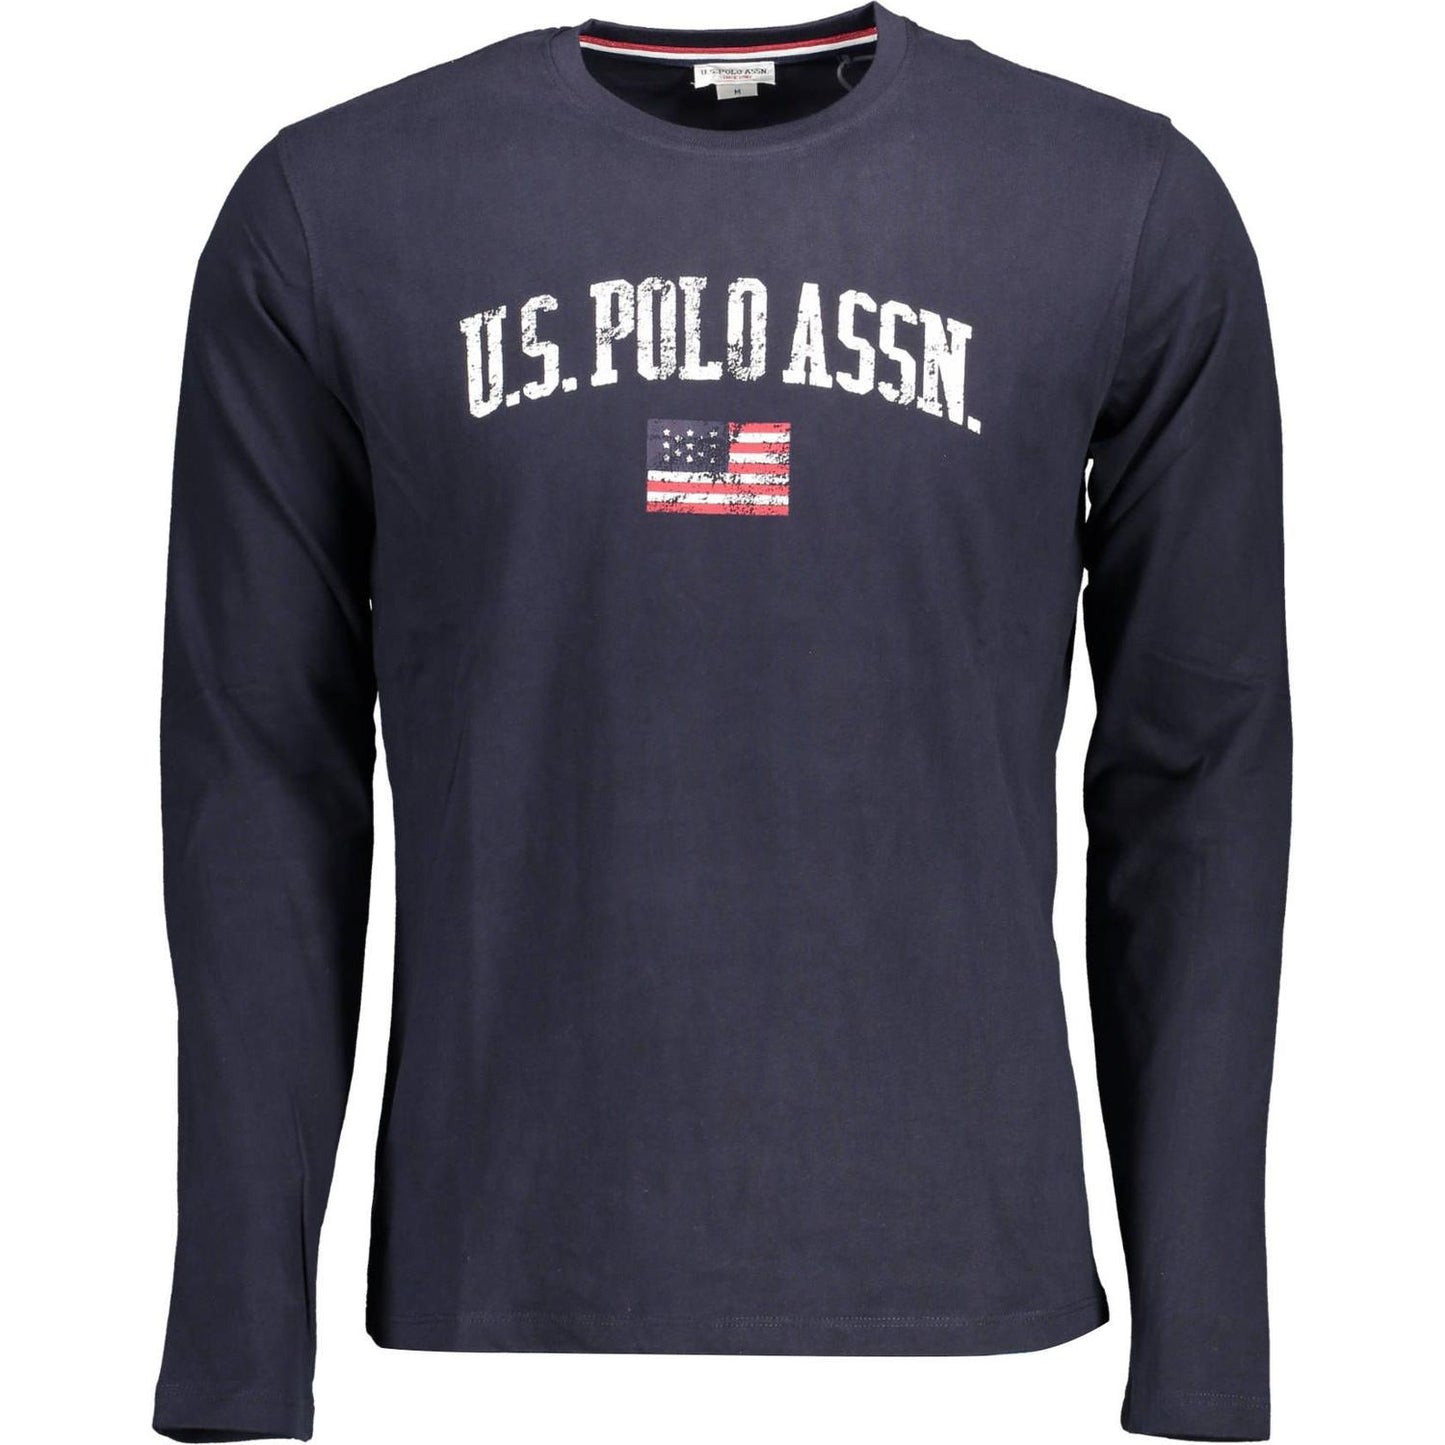 U.S. POLO ASSN. Chic Blue Printed Cotton Tee for Men chic-blue-printed-cotton-tee-for-men